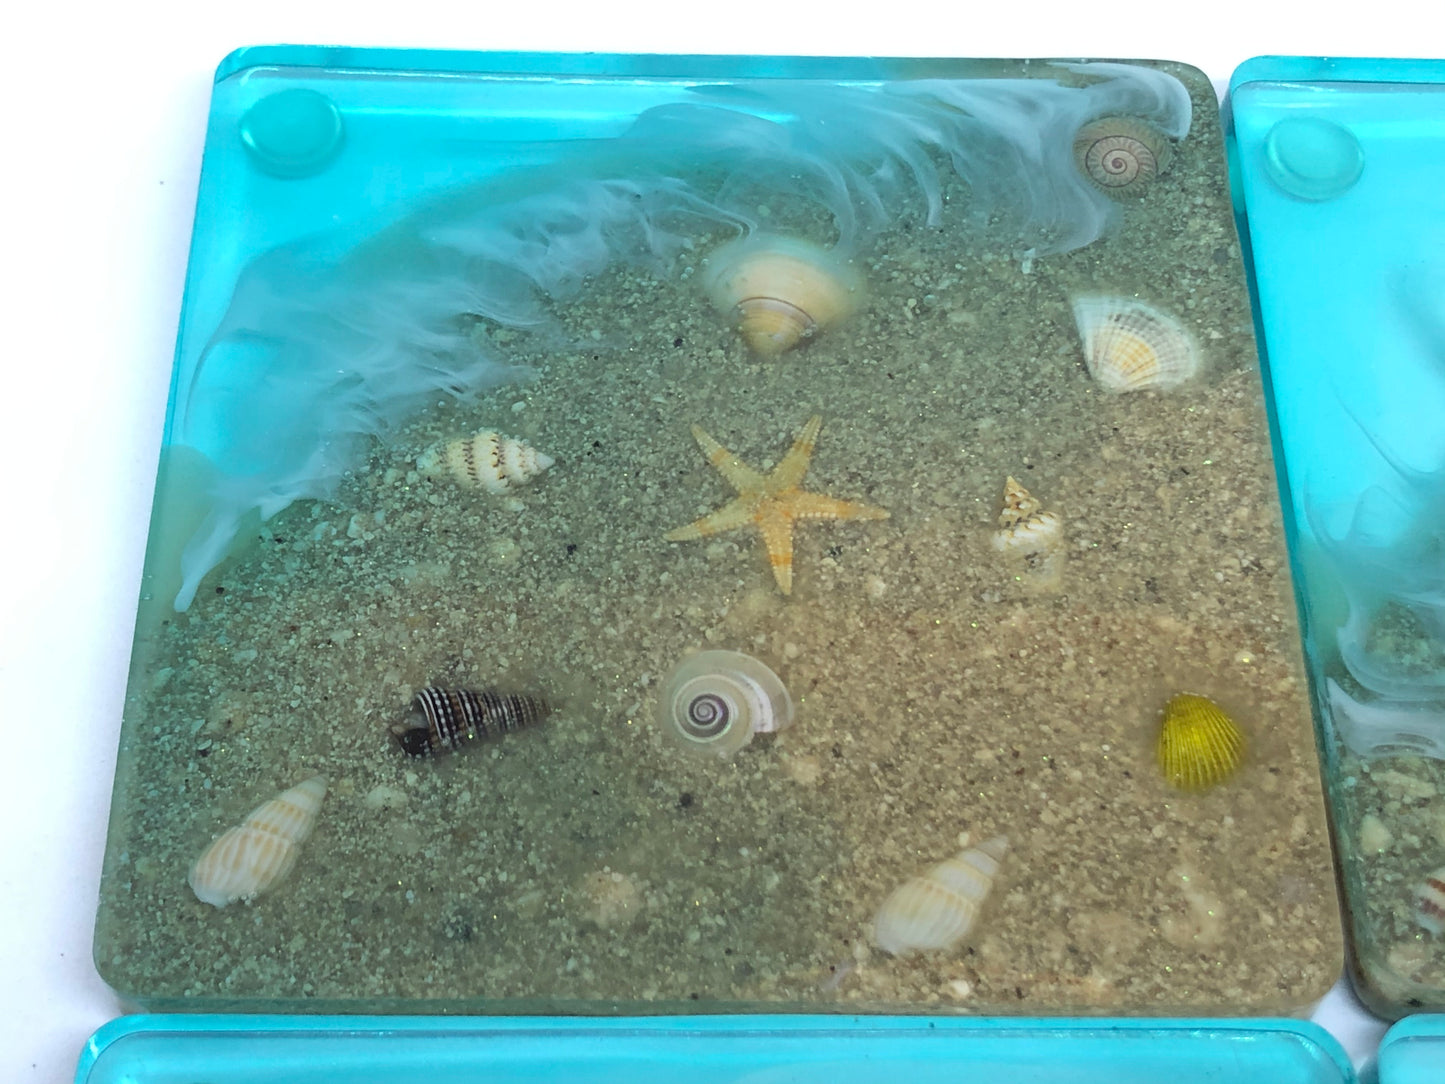 Large Square Beach Coasters with Sand and Shells